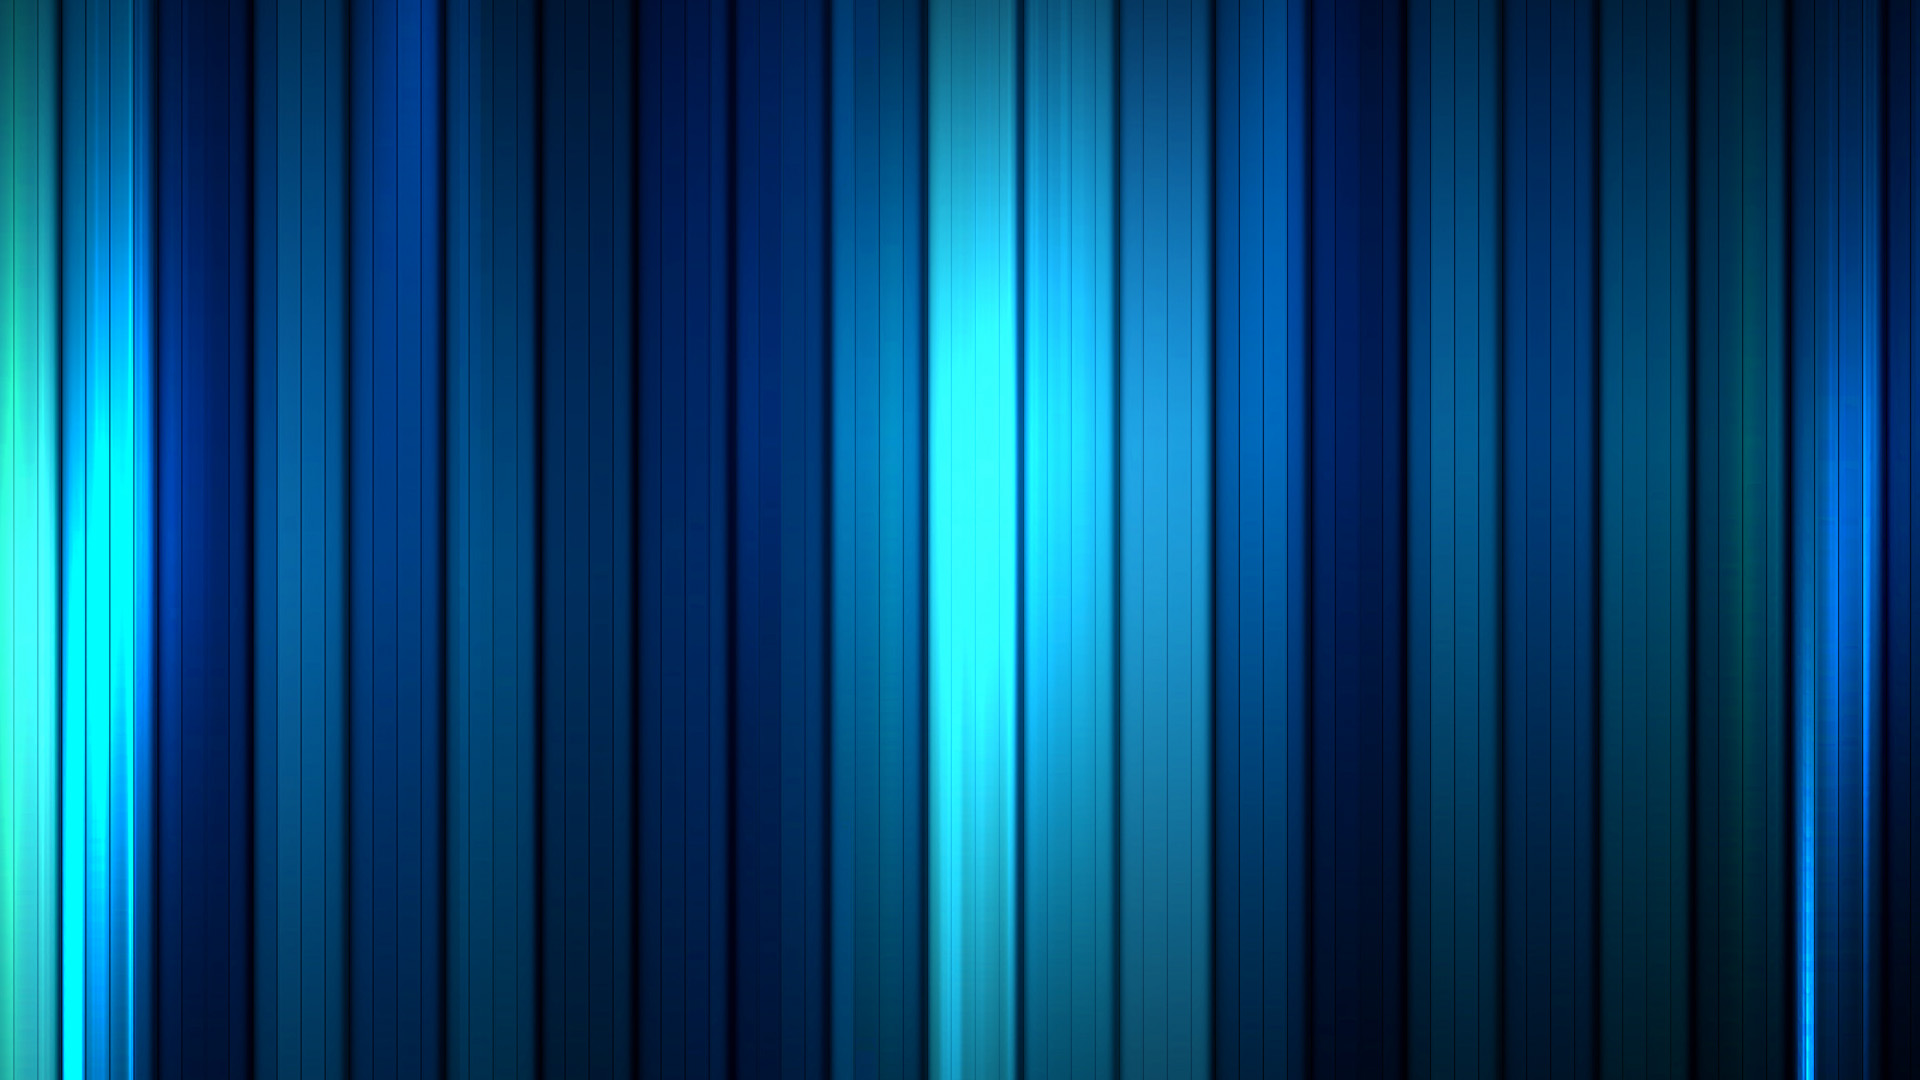 Free Download Light Blue HD Wallpaper Image Picture Sharing